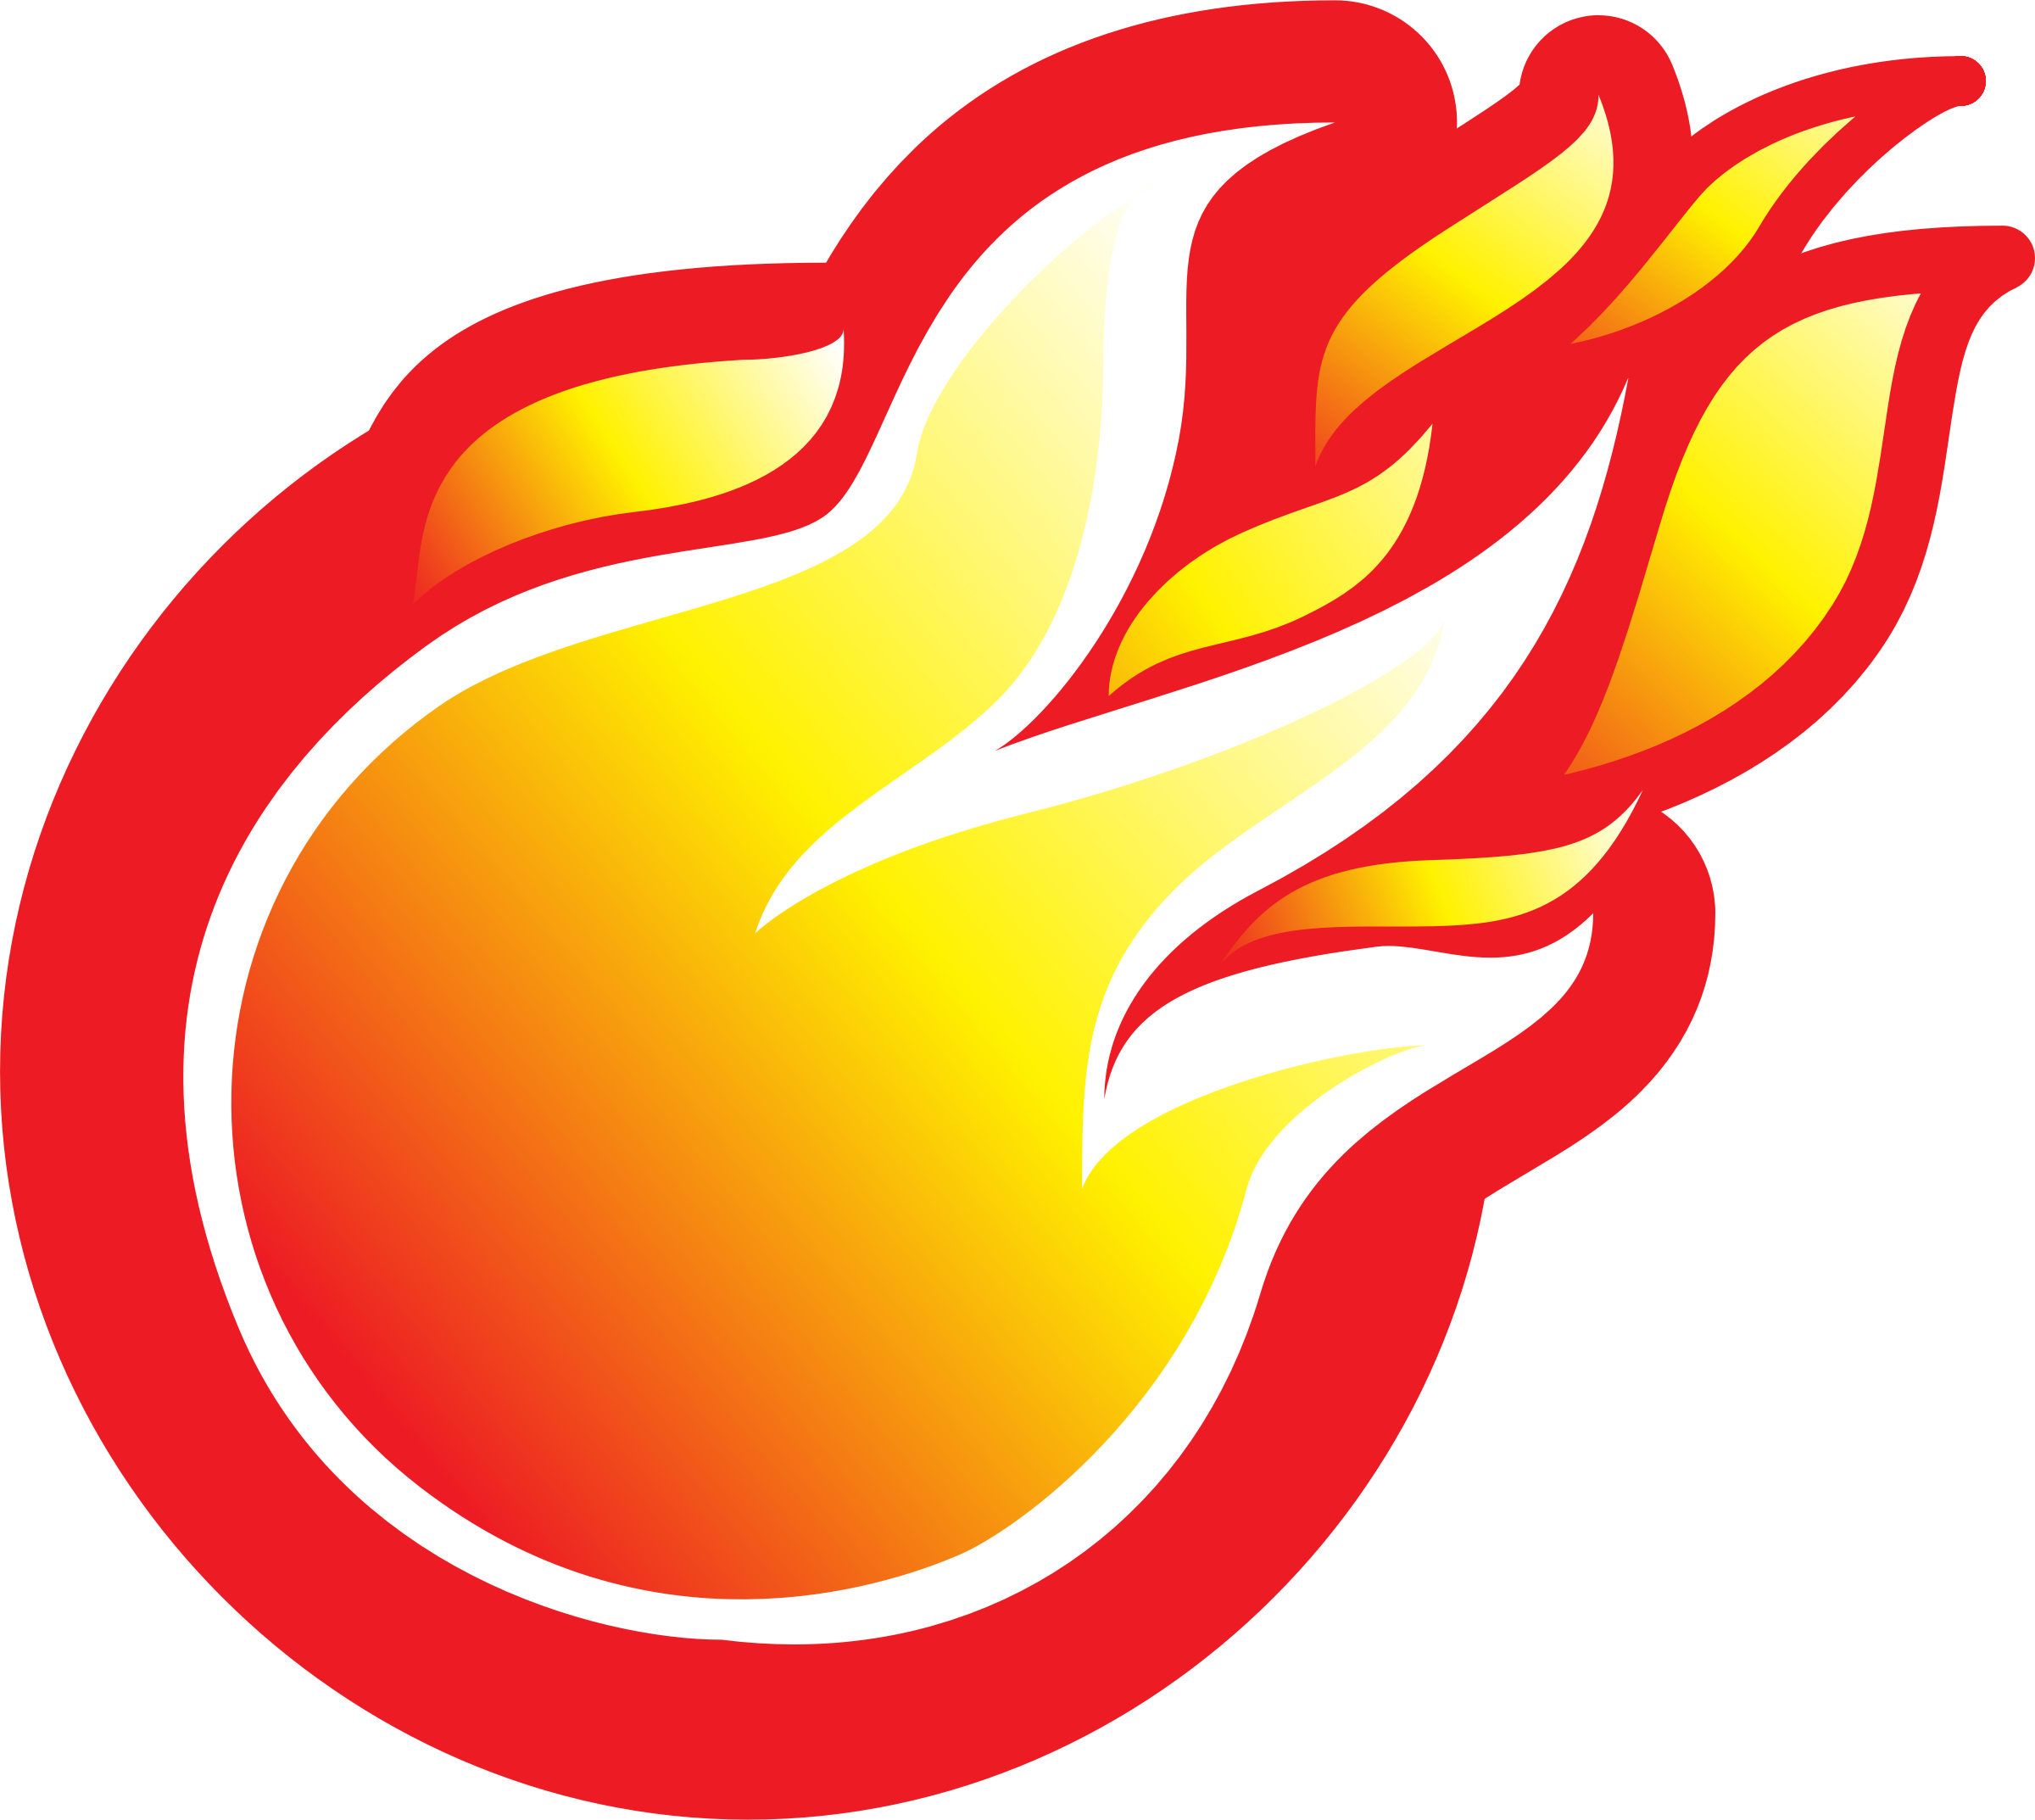 Fire flame clip art free vector for free download about free 3 4 ...